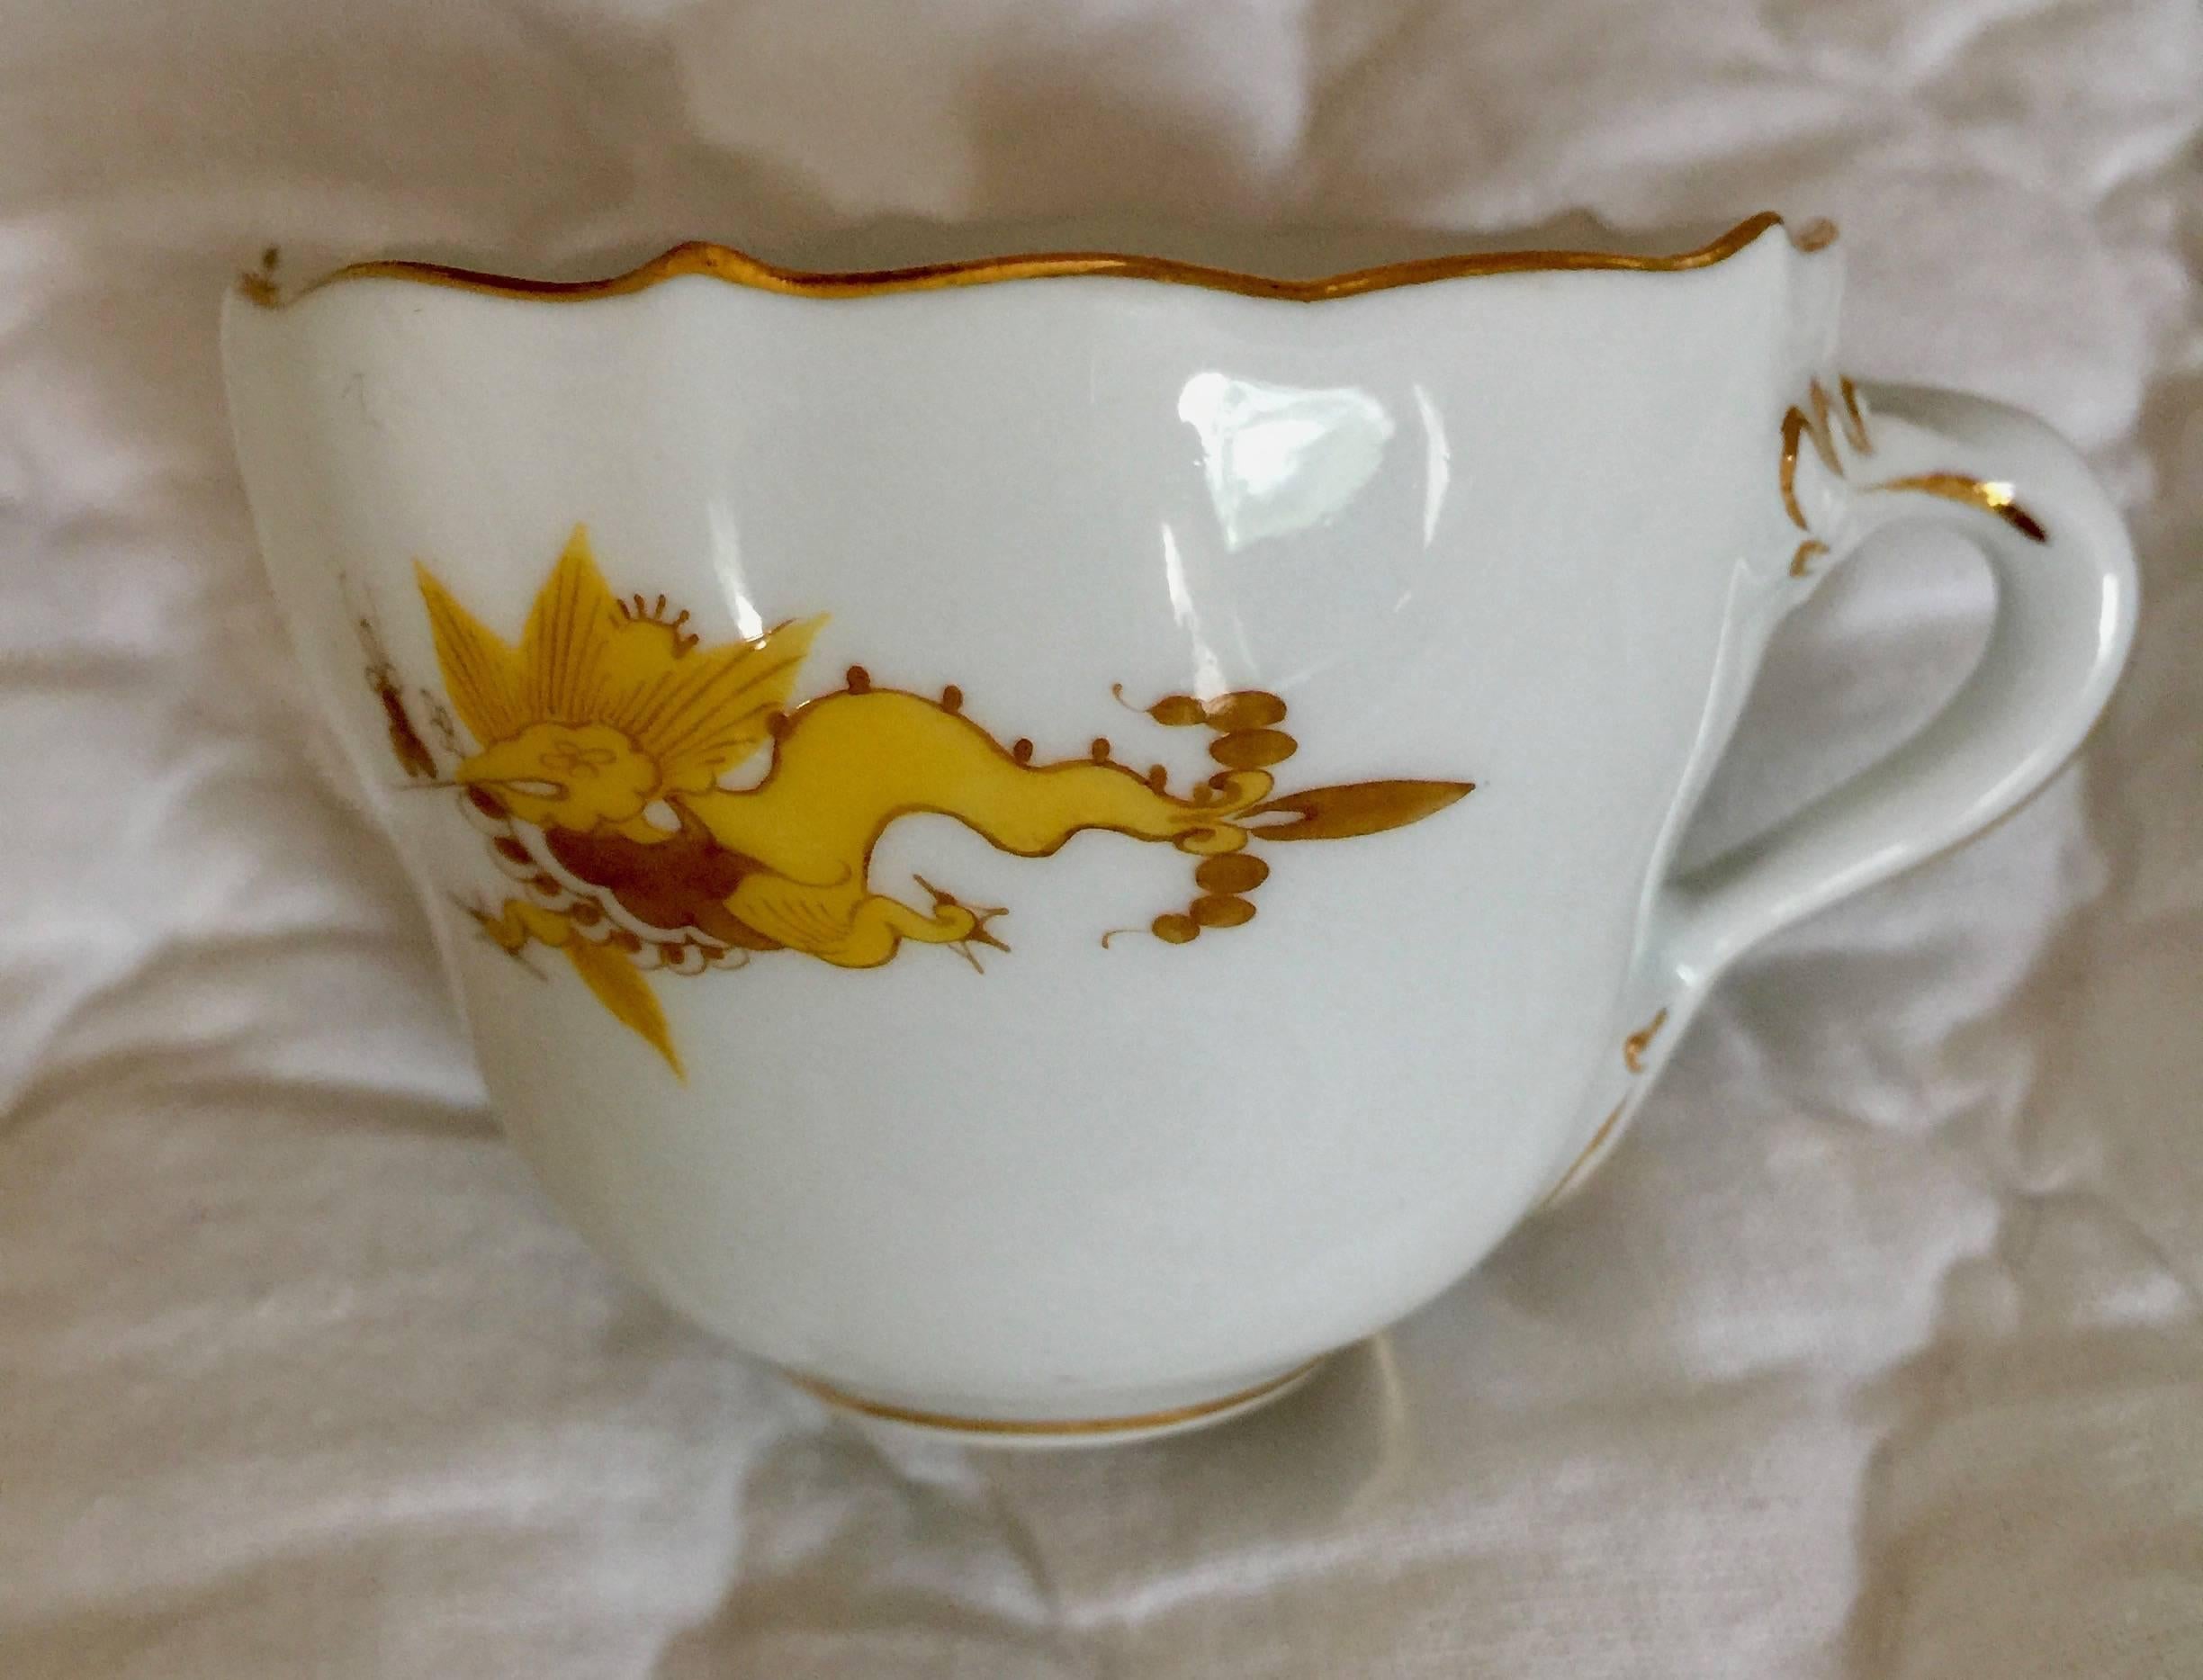 19th Century Meissen Porcelain Scalloped Yellow Dragon Demitasse Cup and Saucer 2